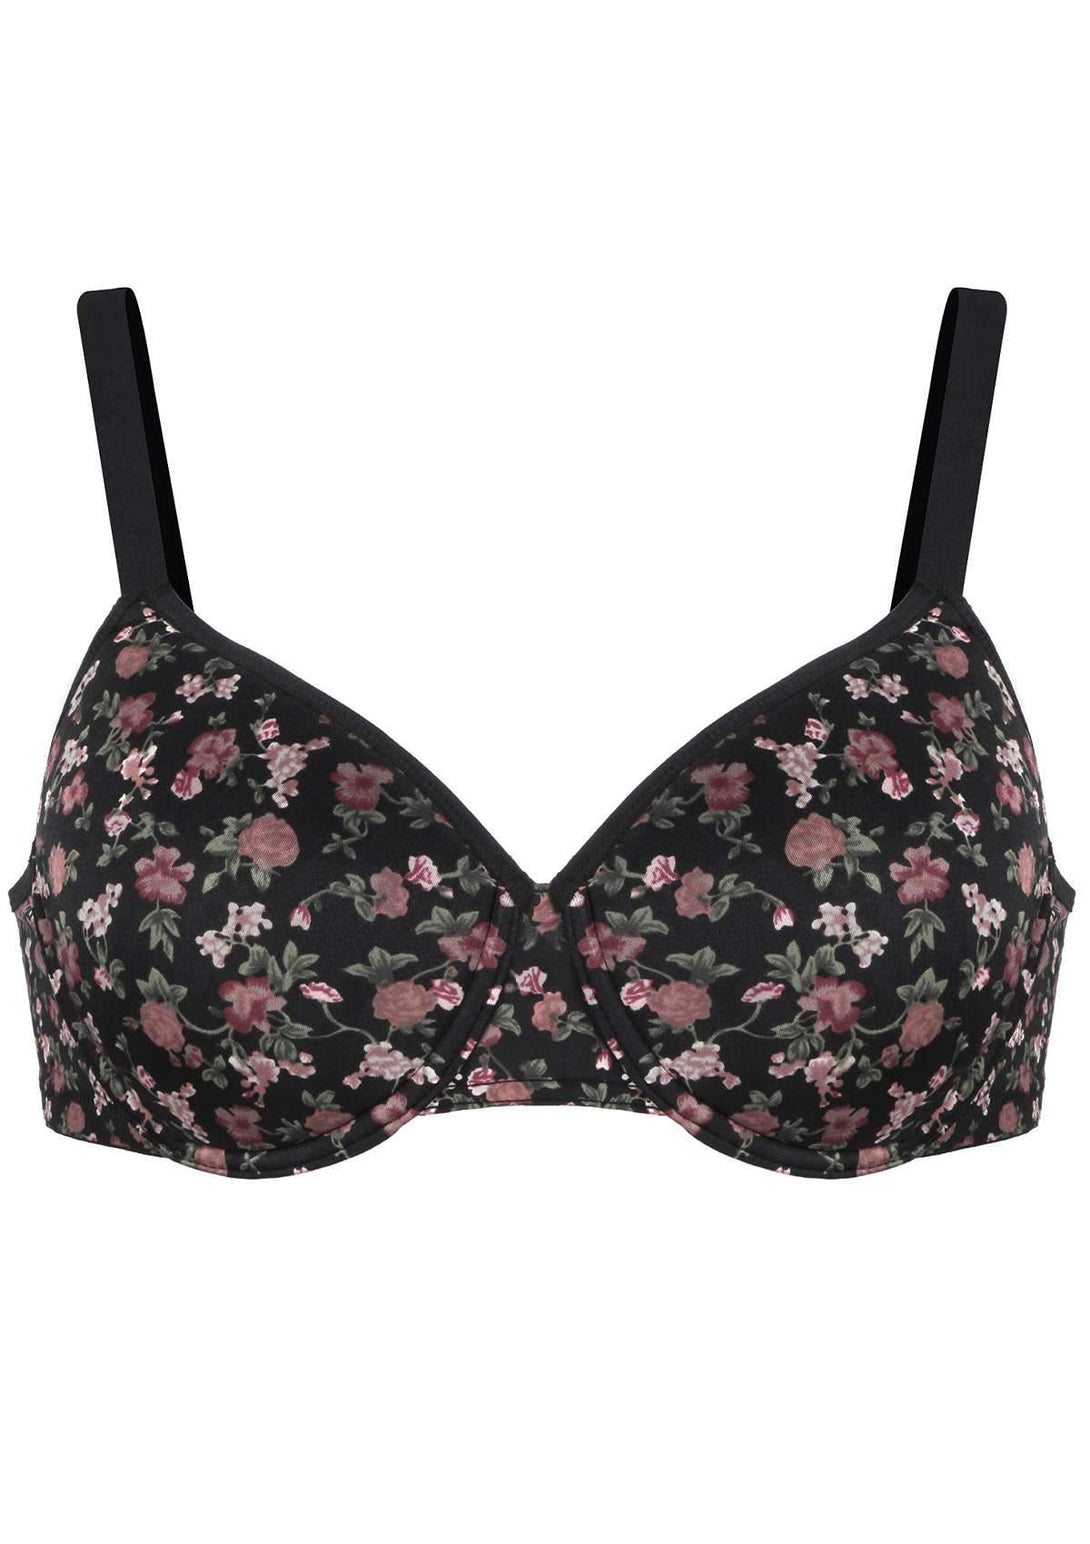 HSIA HSIA Vintage Floral Perfect Coverage Bra